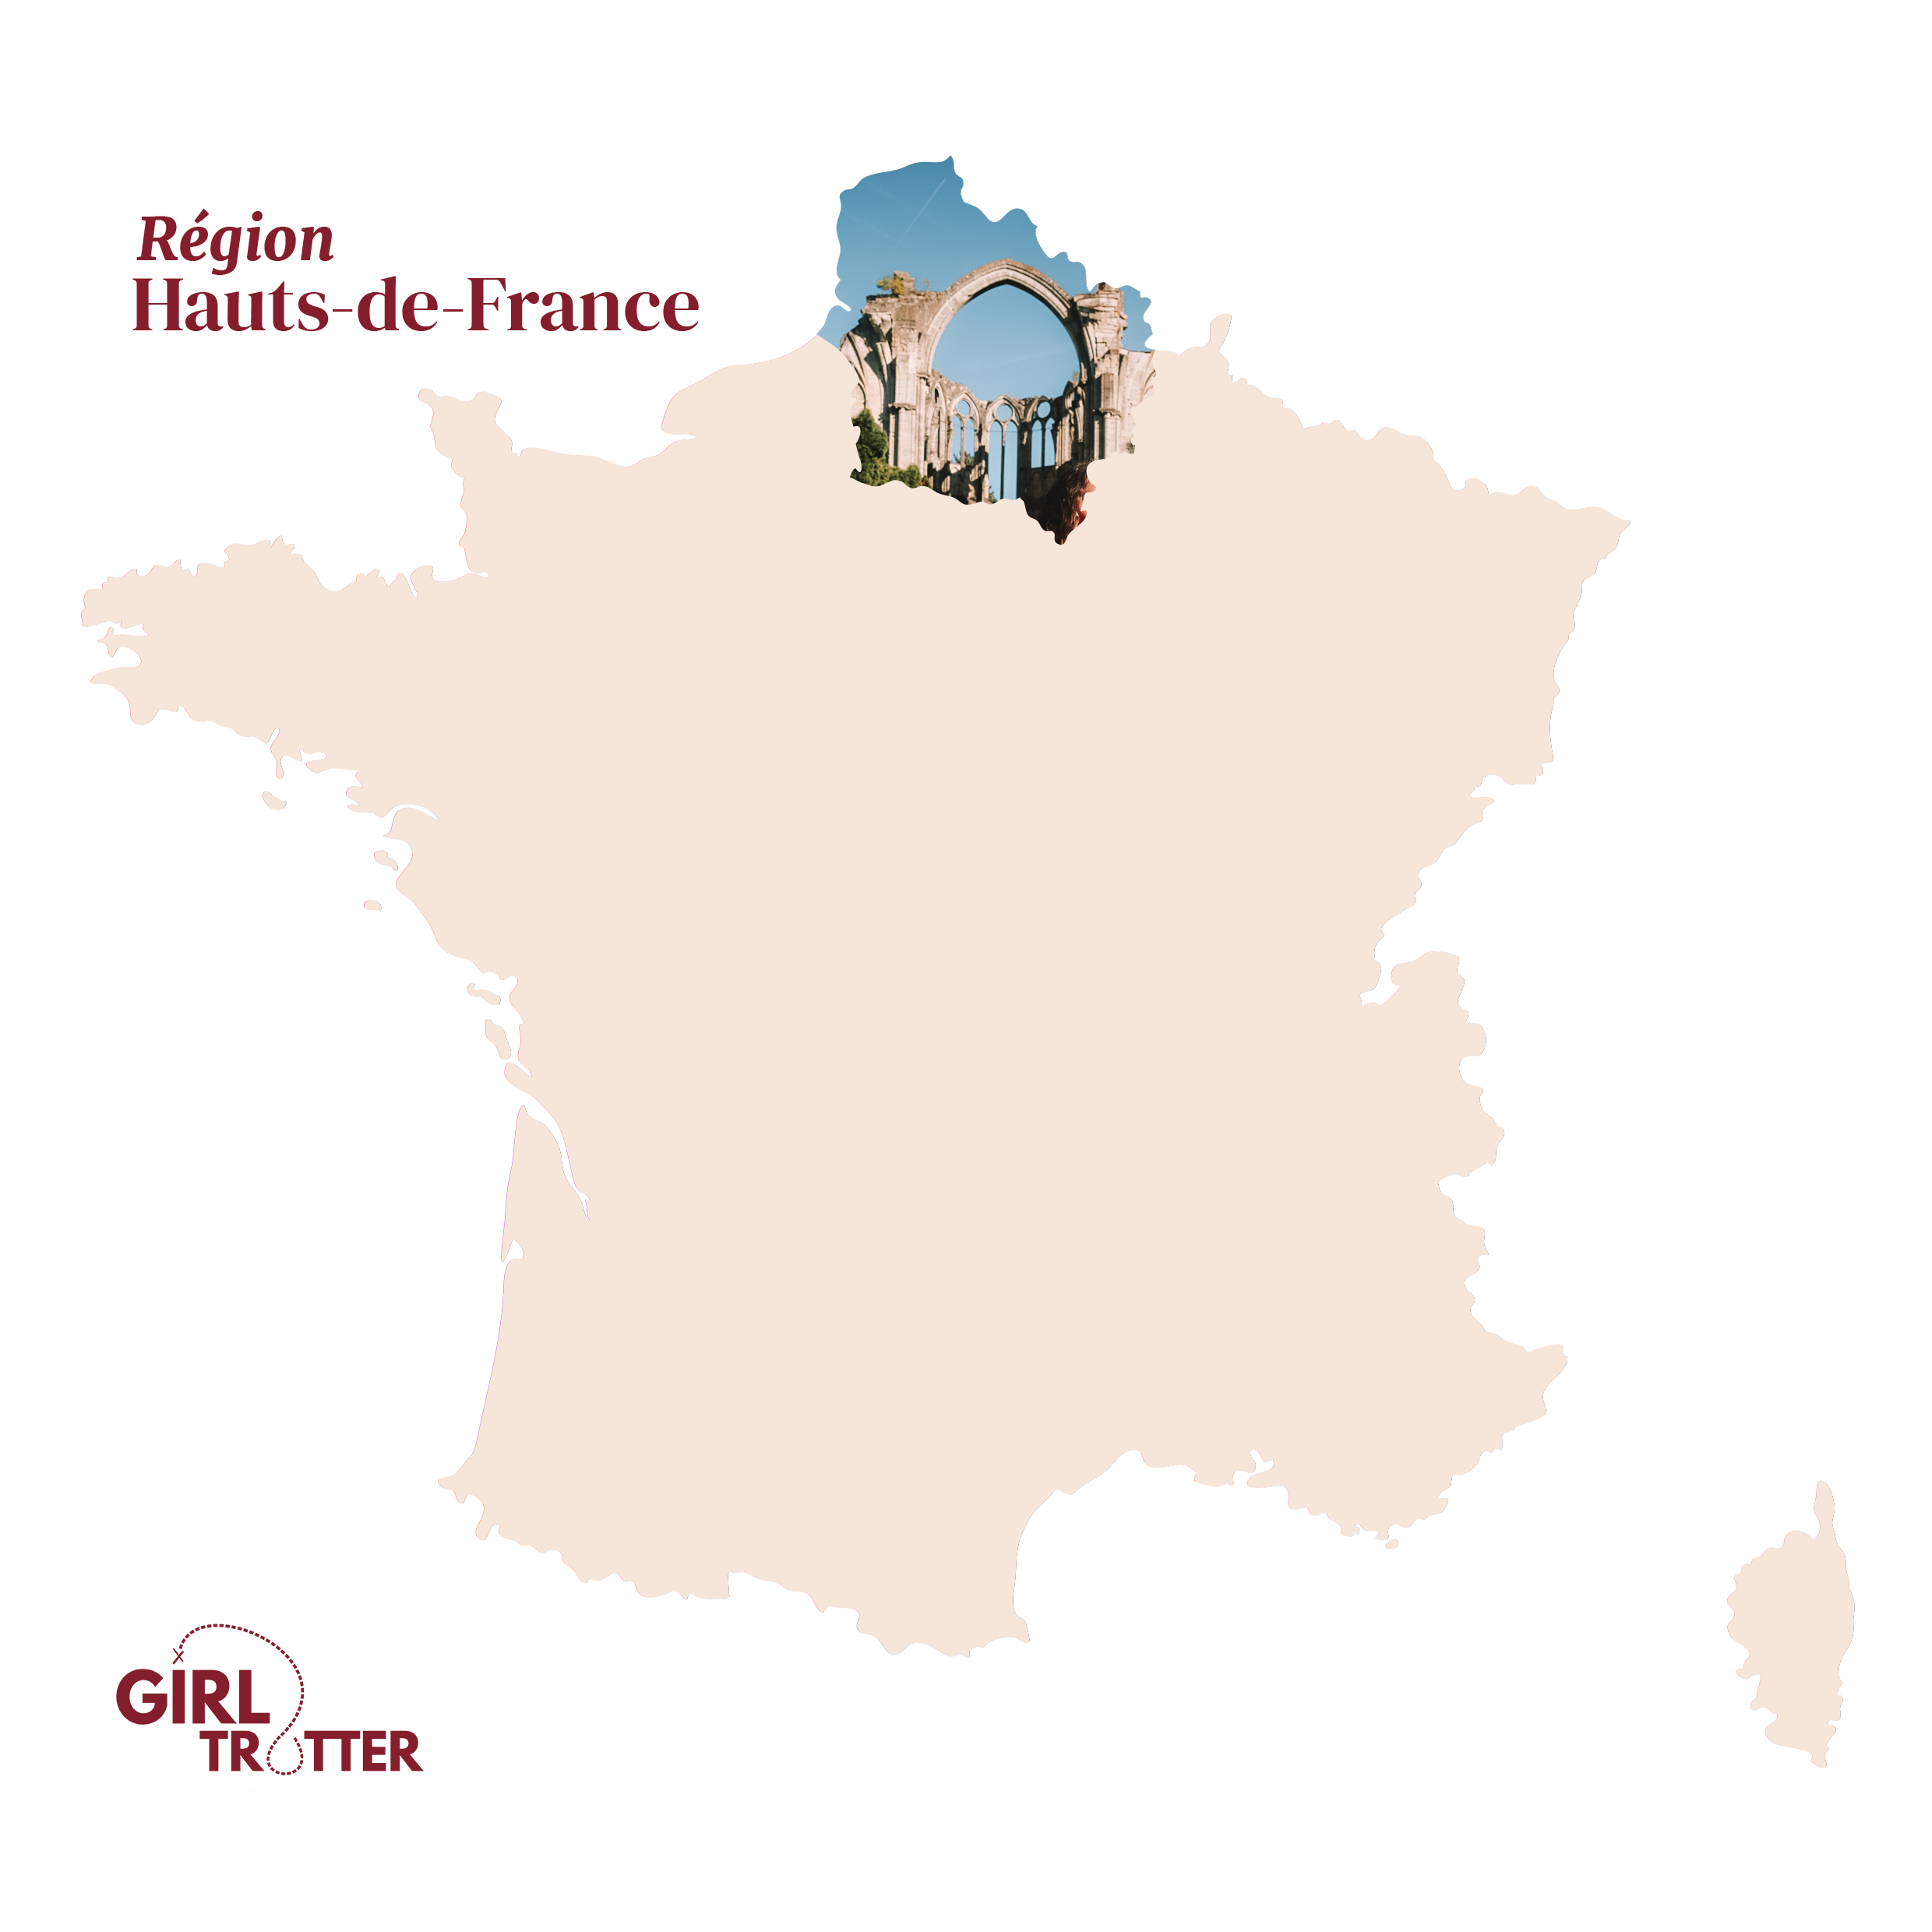 carte région hauts de france blog voyage girltrotter beige rouge image abbaye chiry ourscamp